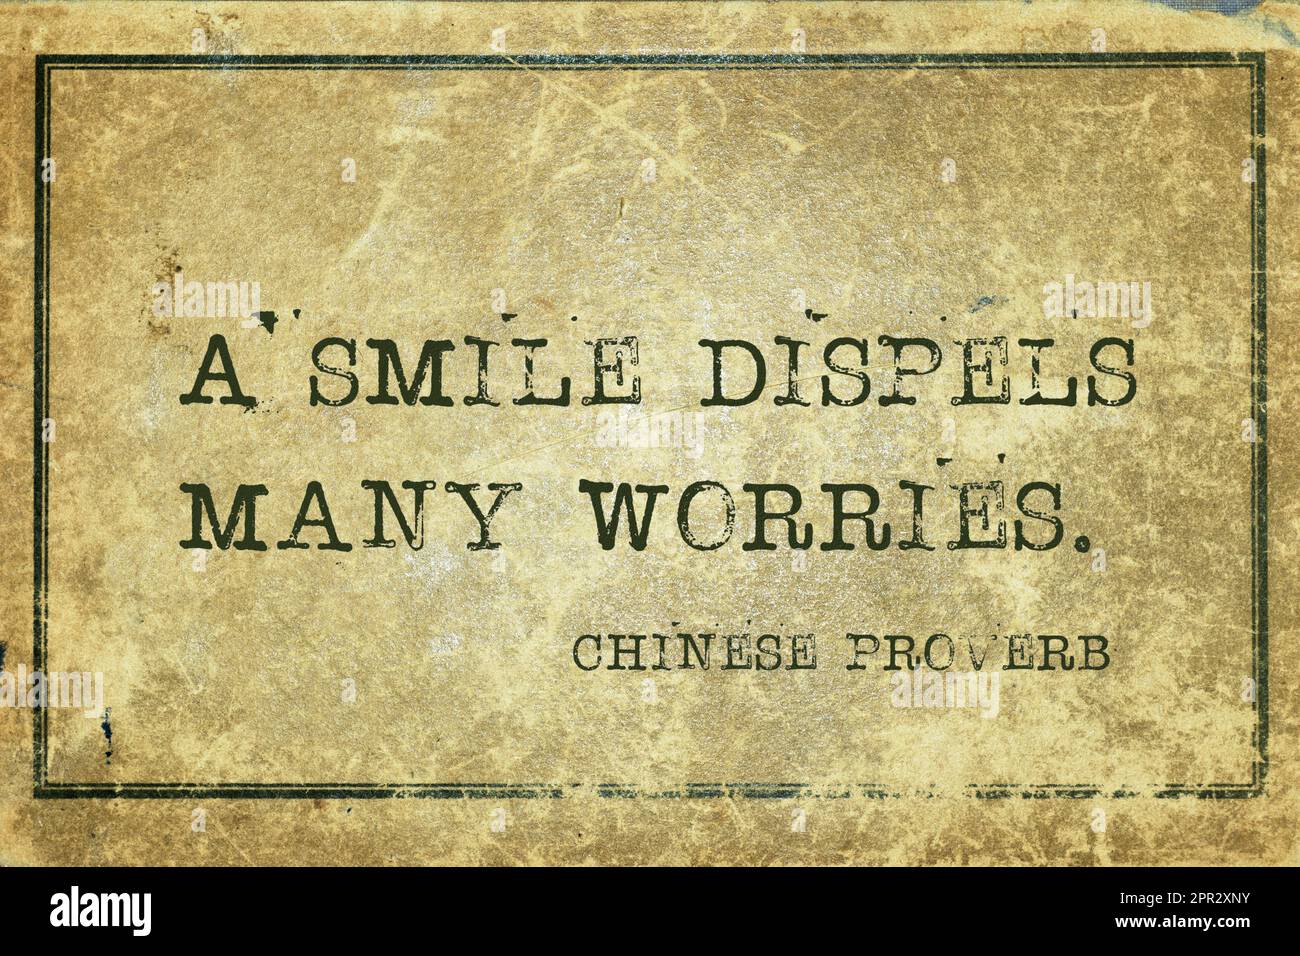 A smile dispels many worries - ancient Chinese proverb printed on grunge vintage cardboard Stock Photo